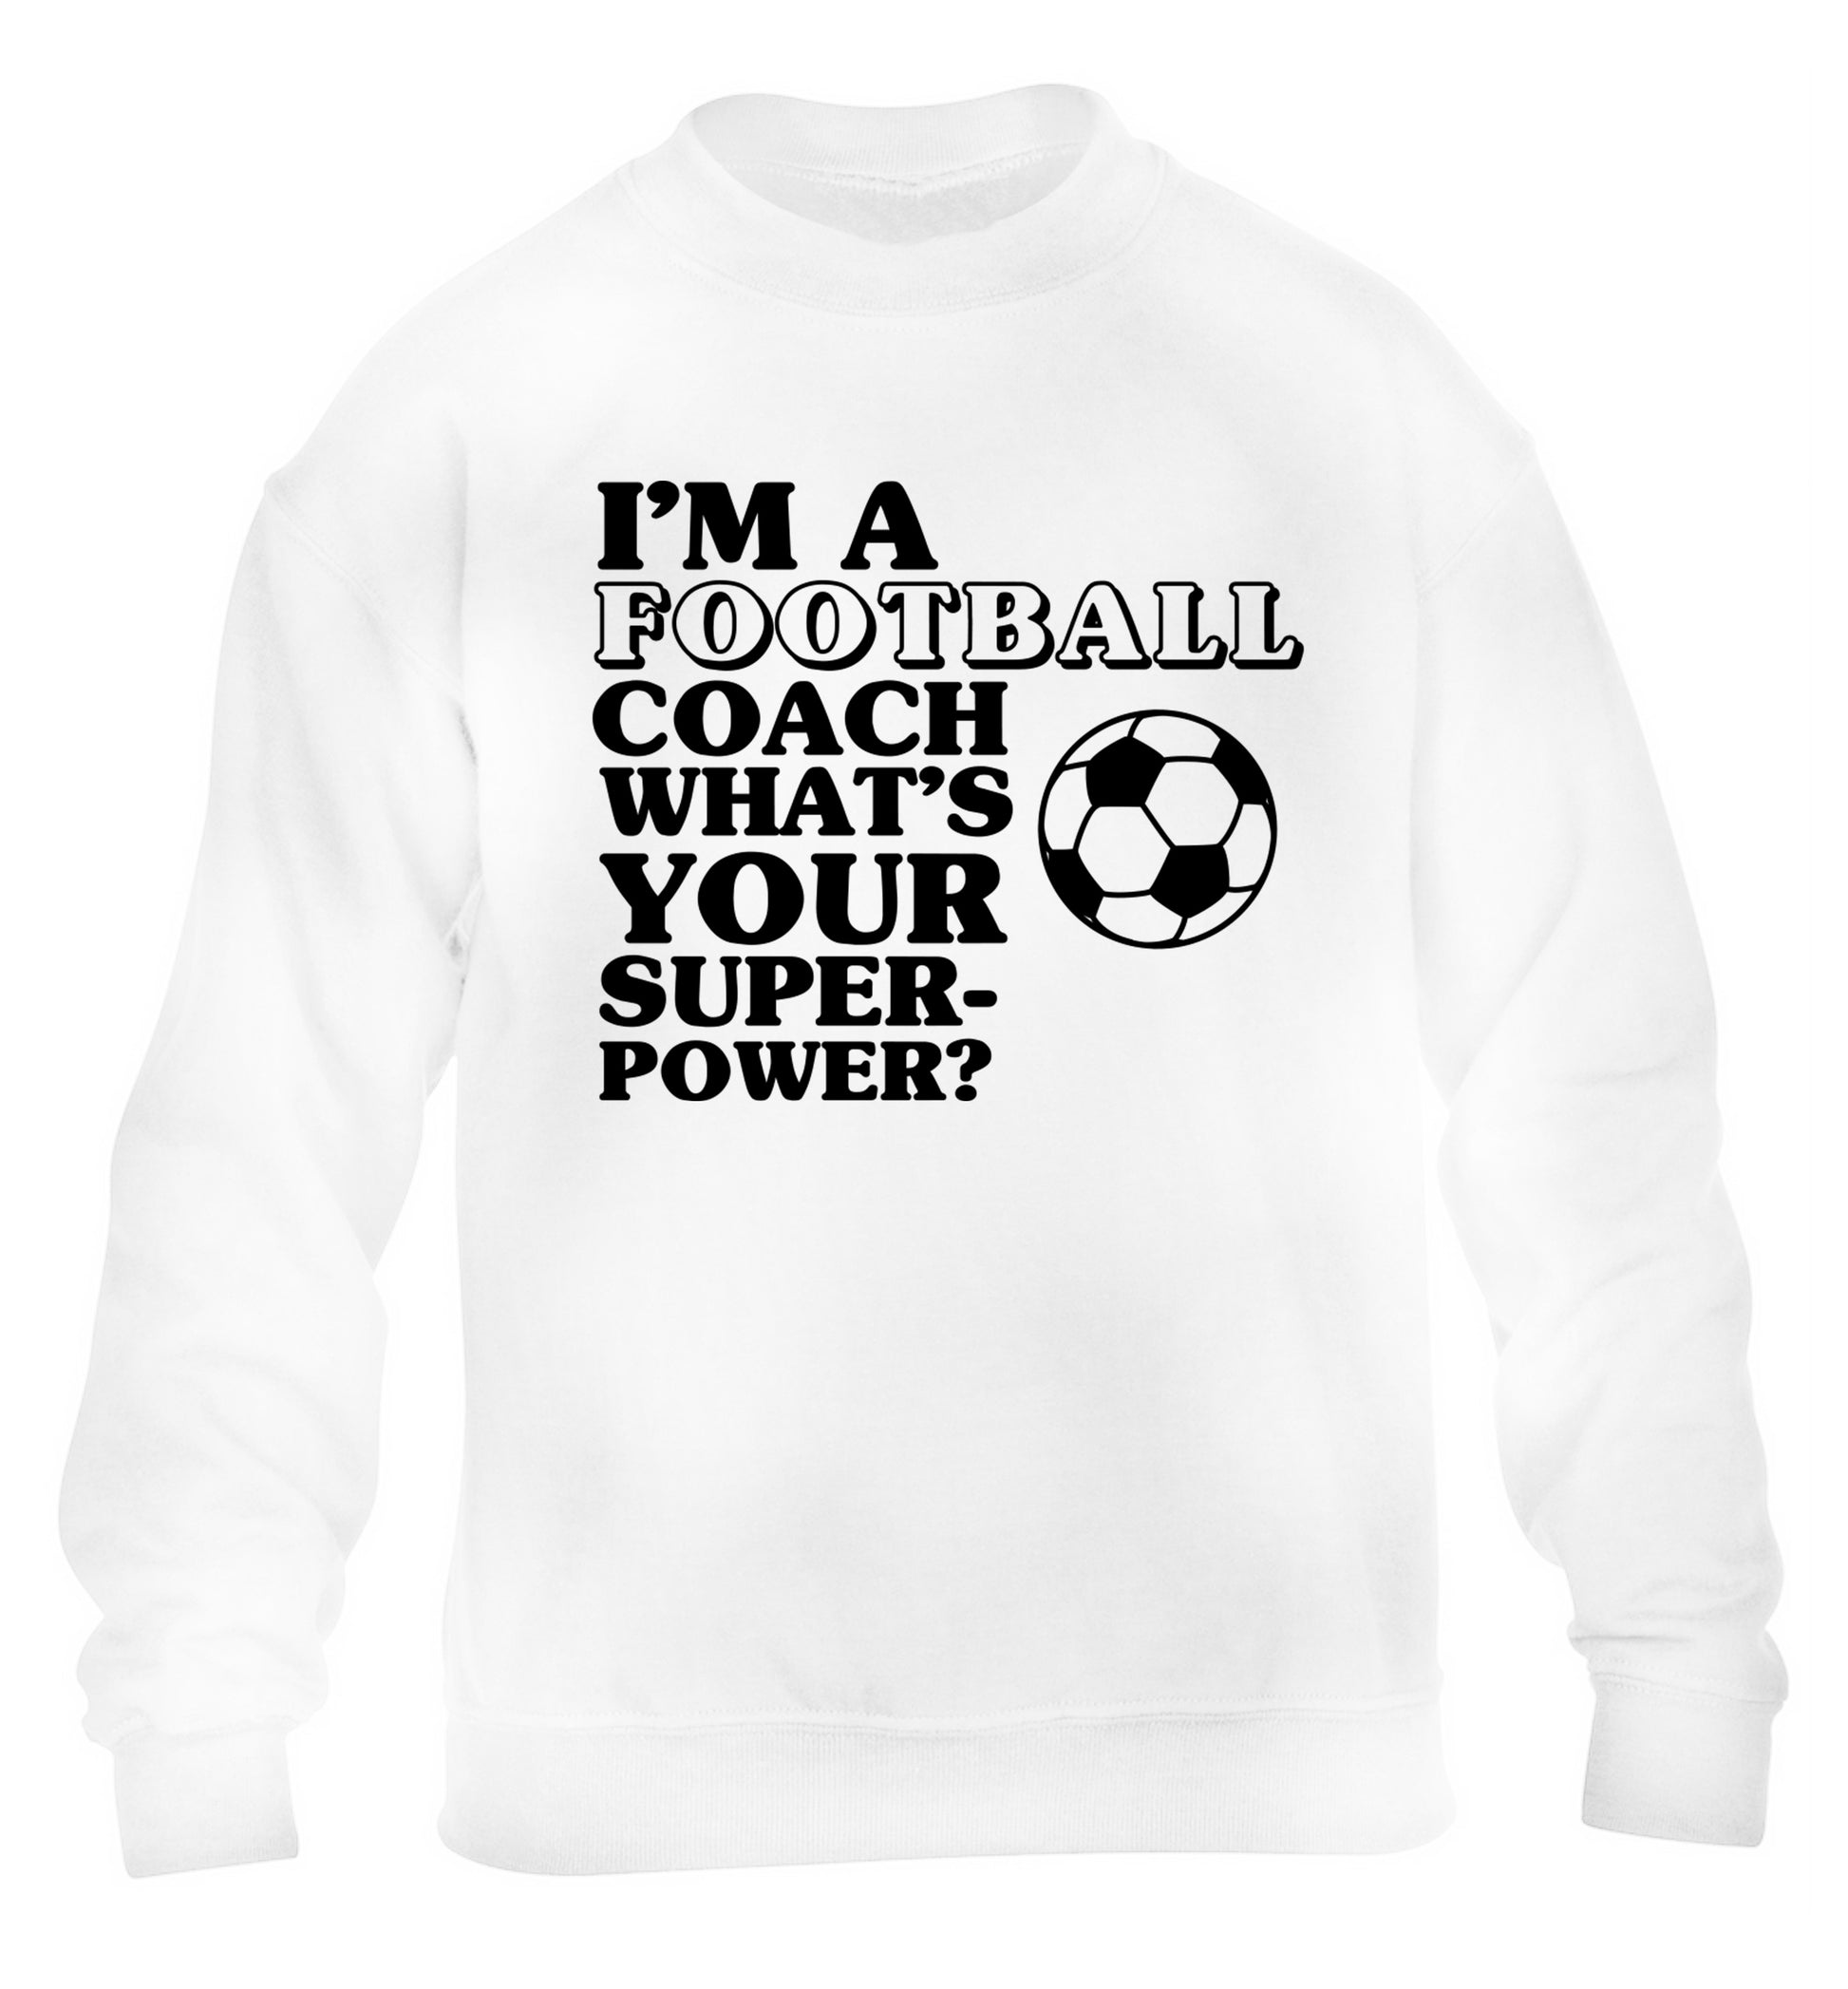 I'm a football coach what's your superpower? children's white sweater 12-14 Years